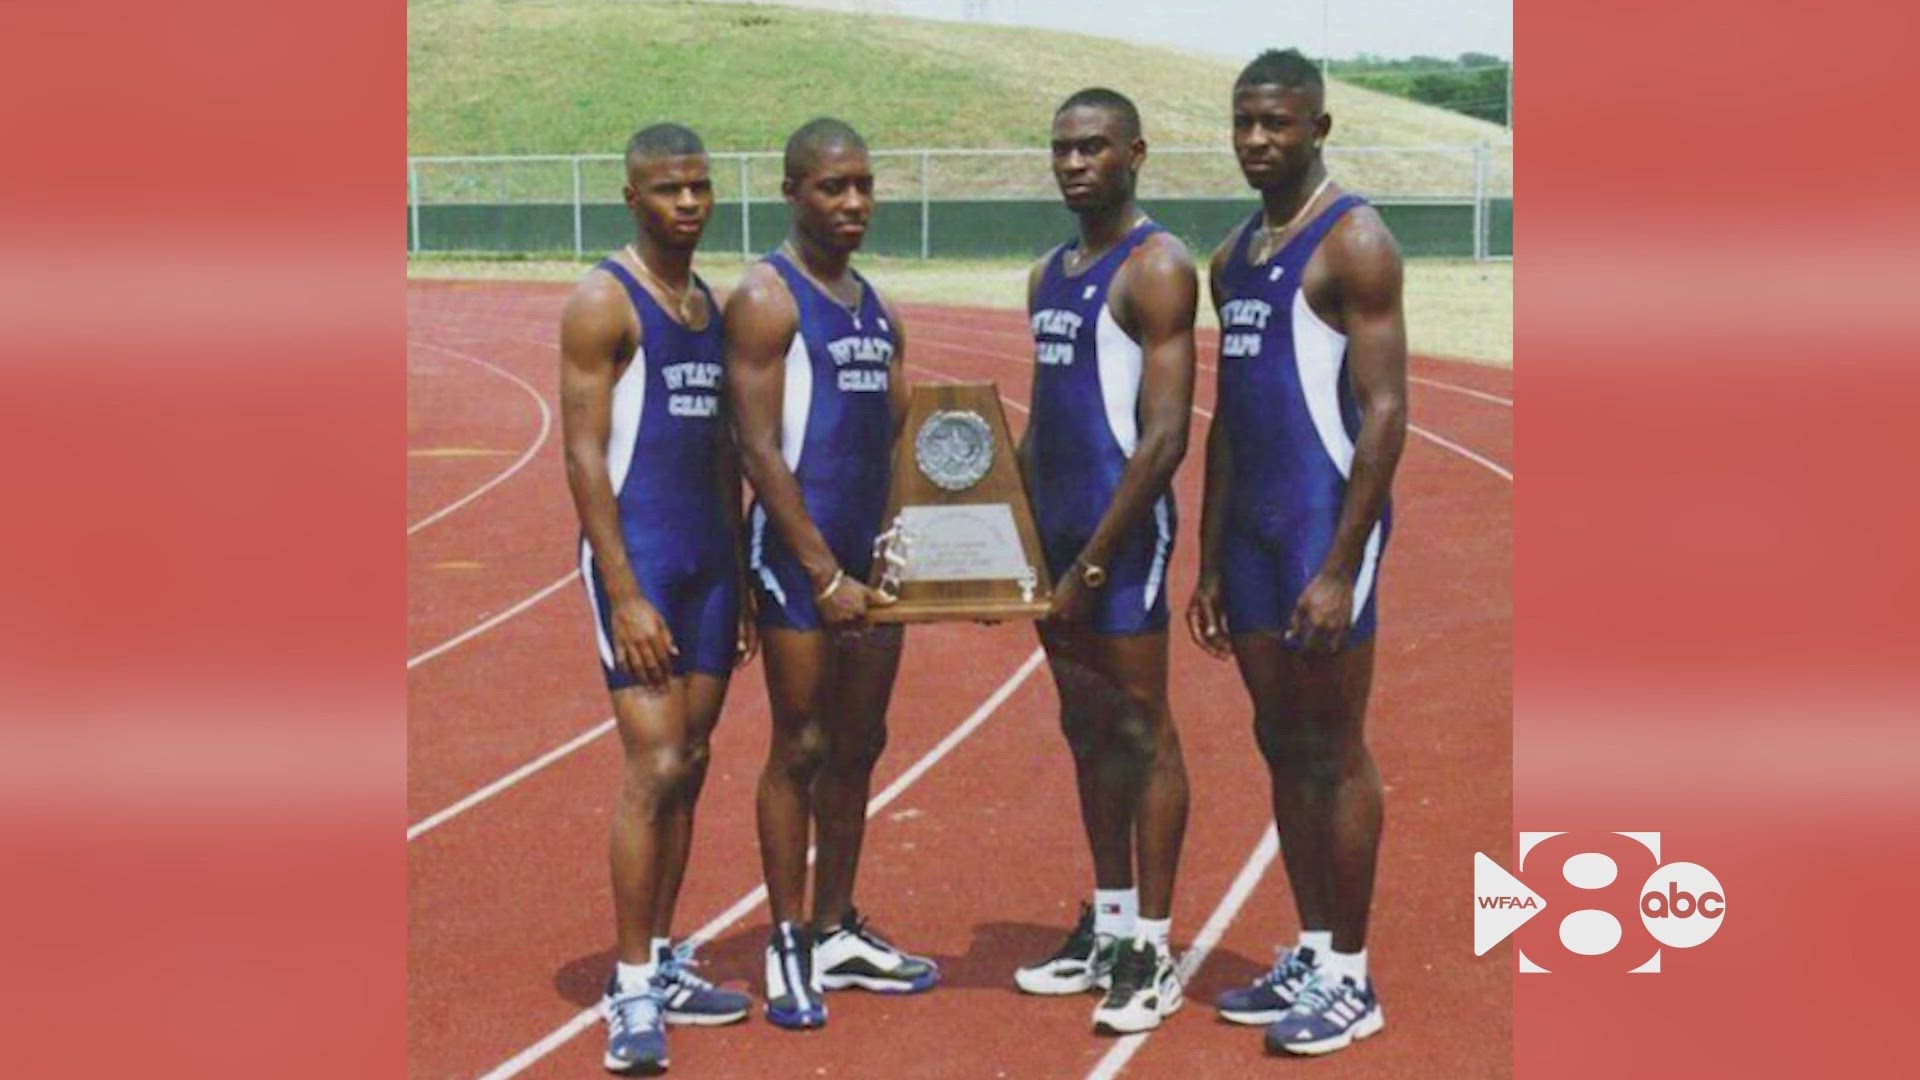 In 1998, the 4x100m relay team at O.D. Wyatt High School ran a 39.76, which broke both Texas and national records. To this day, the time has yet to be beat.